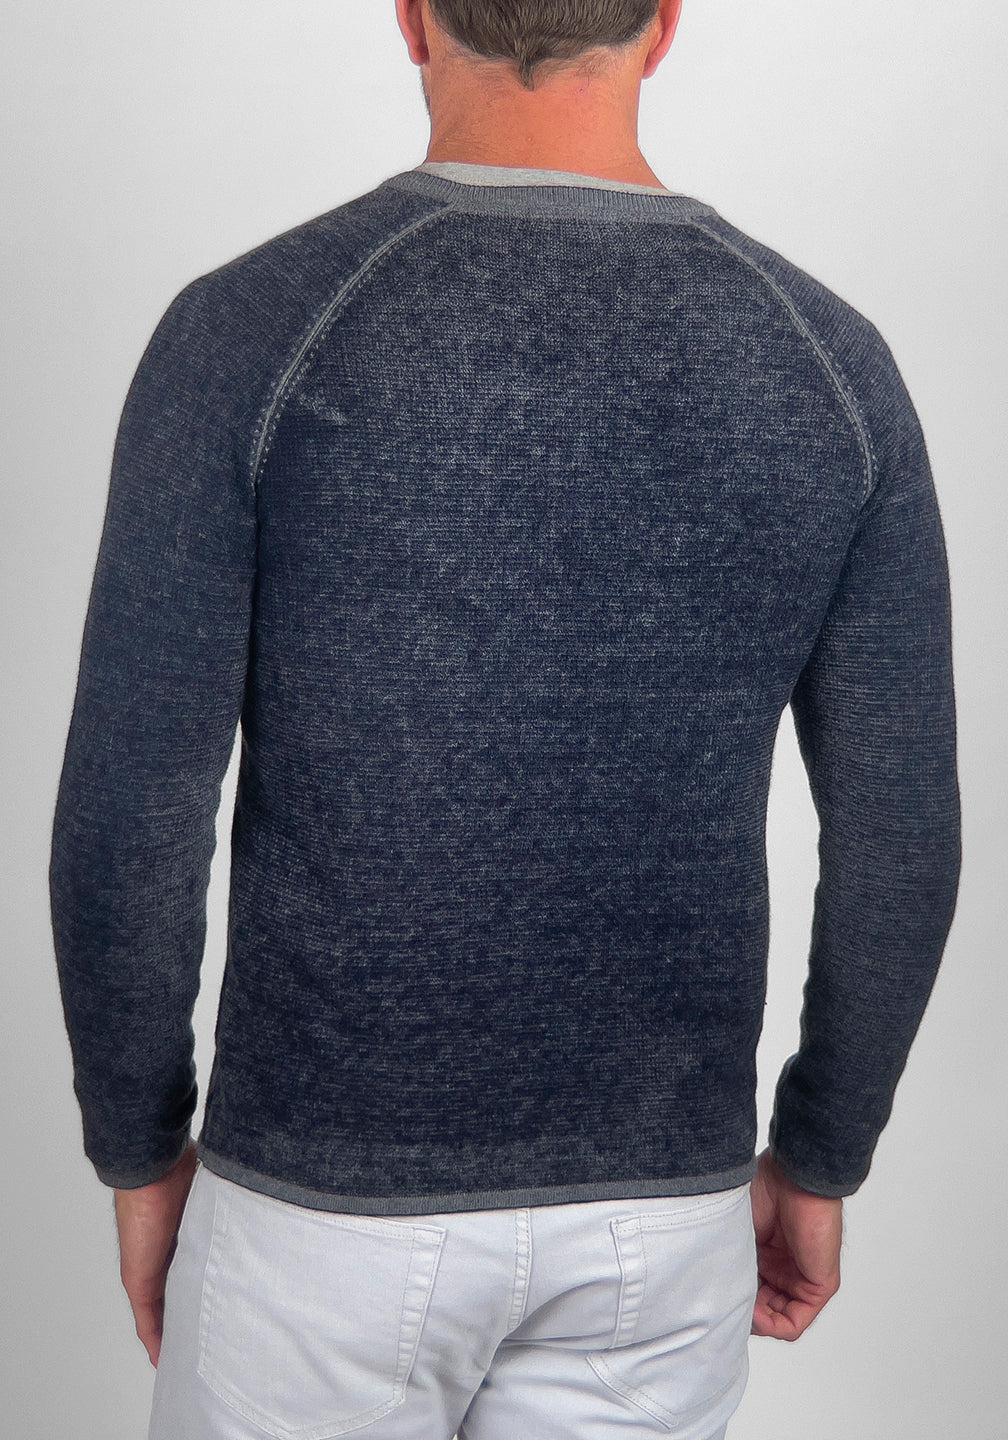 Cotton/ Cashmere Waffle Henley Sweater in Navy Pigment Print